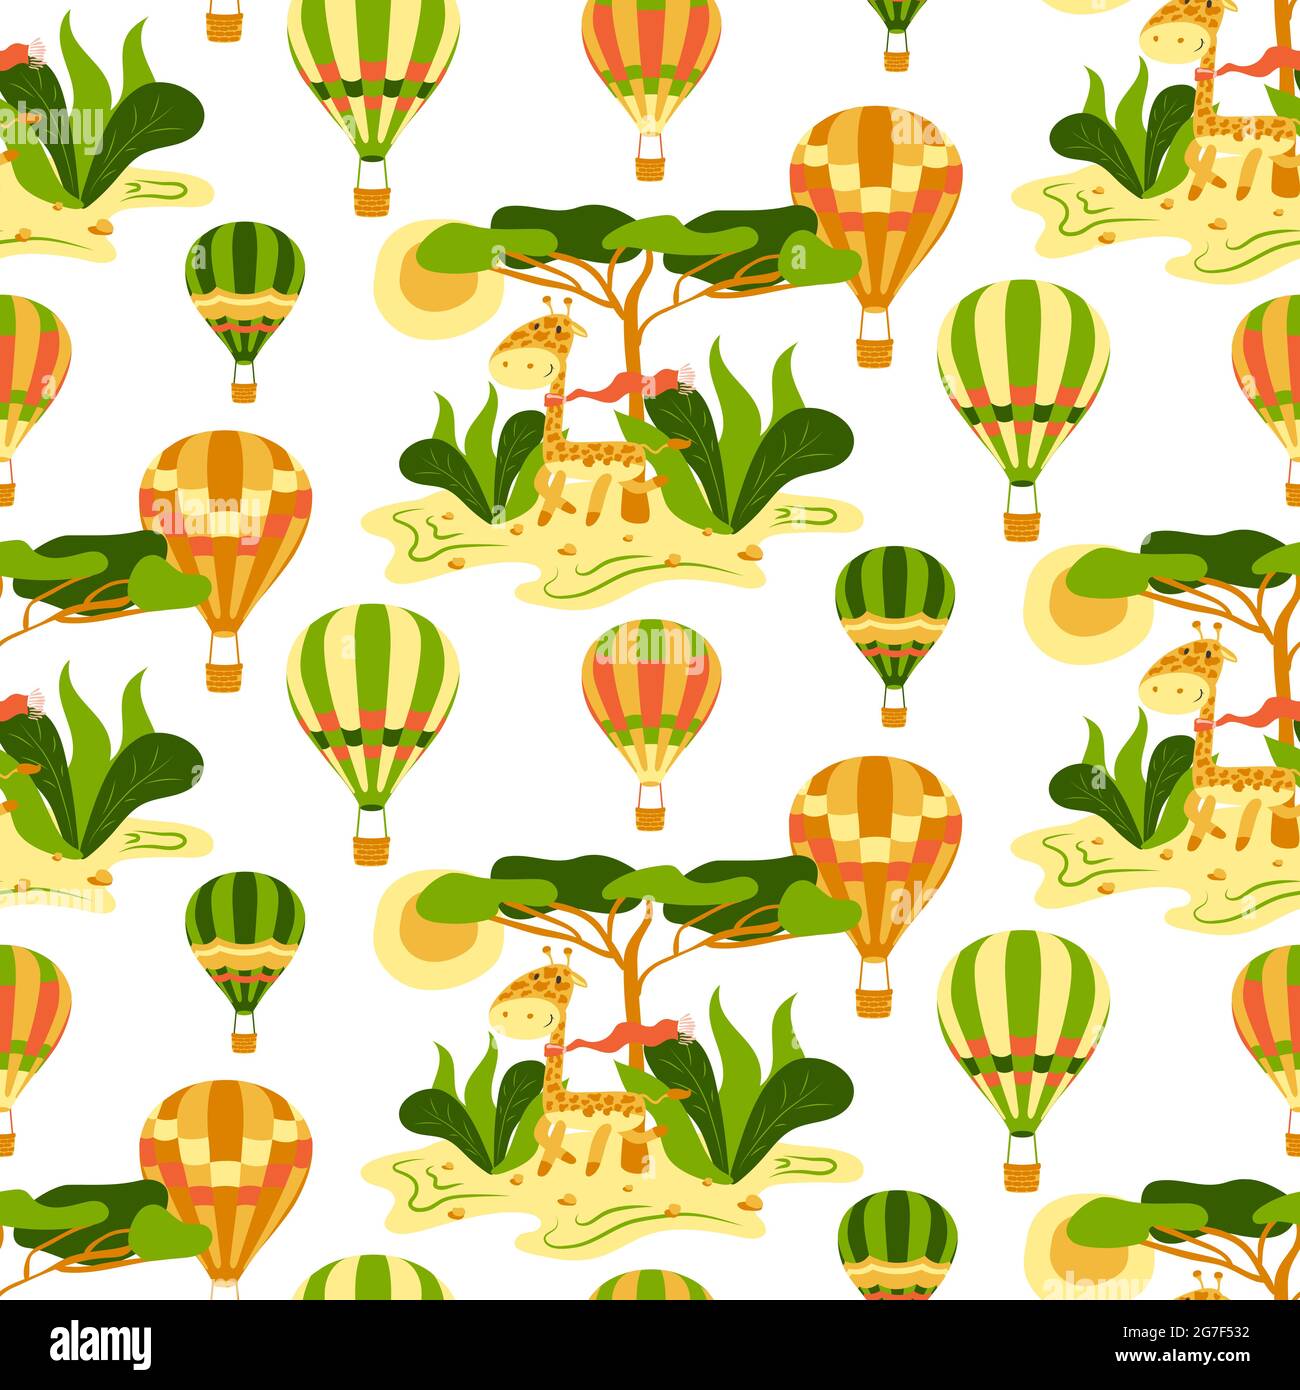 Childish seamless pattern with hot air balloons, giraffe and savanna on a white background. Vector kids texture with cute giraffe and hot air balloon. Stock Vector